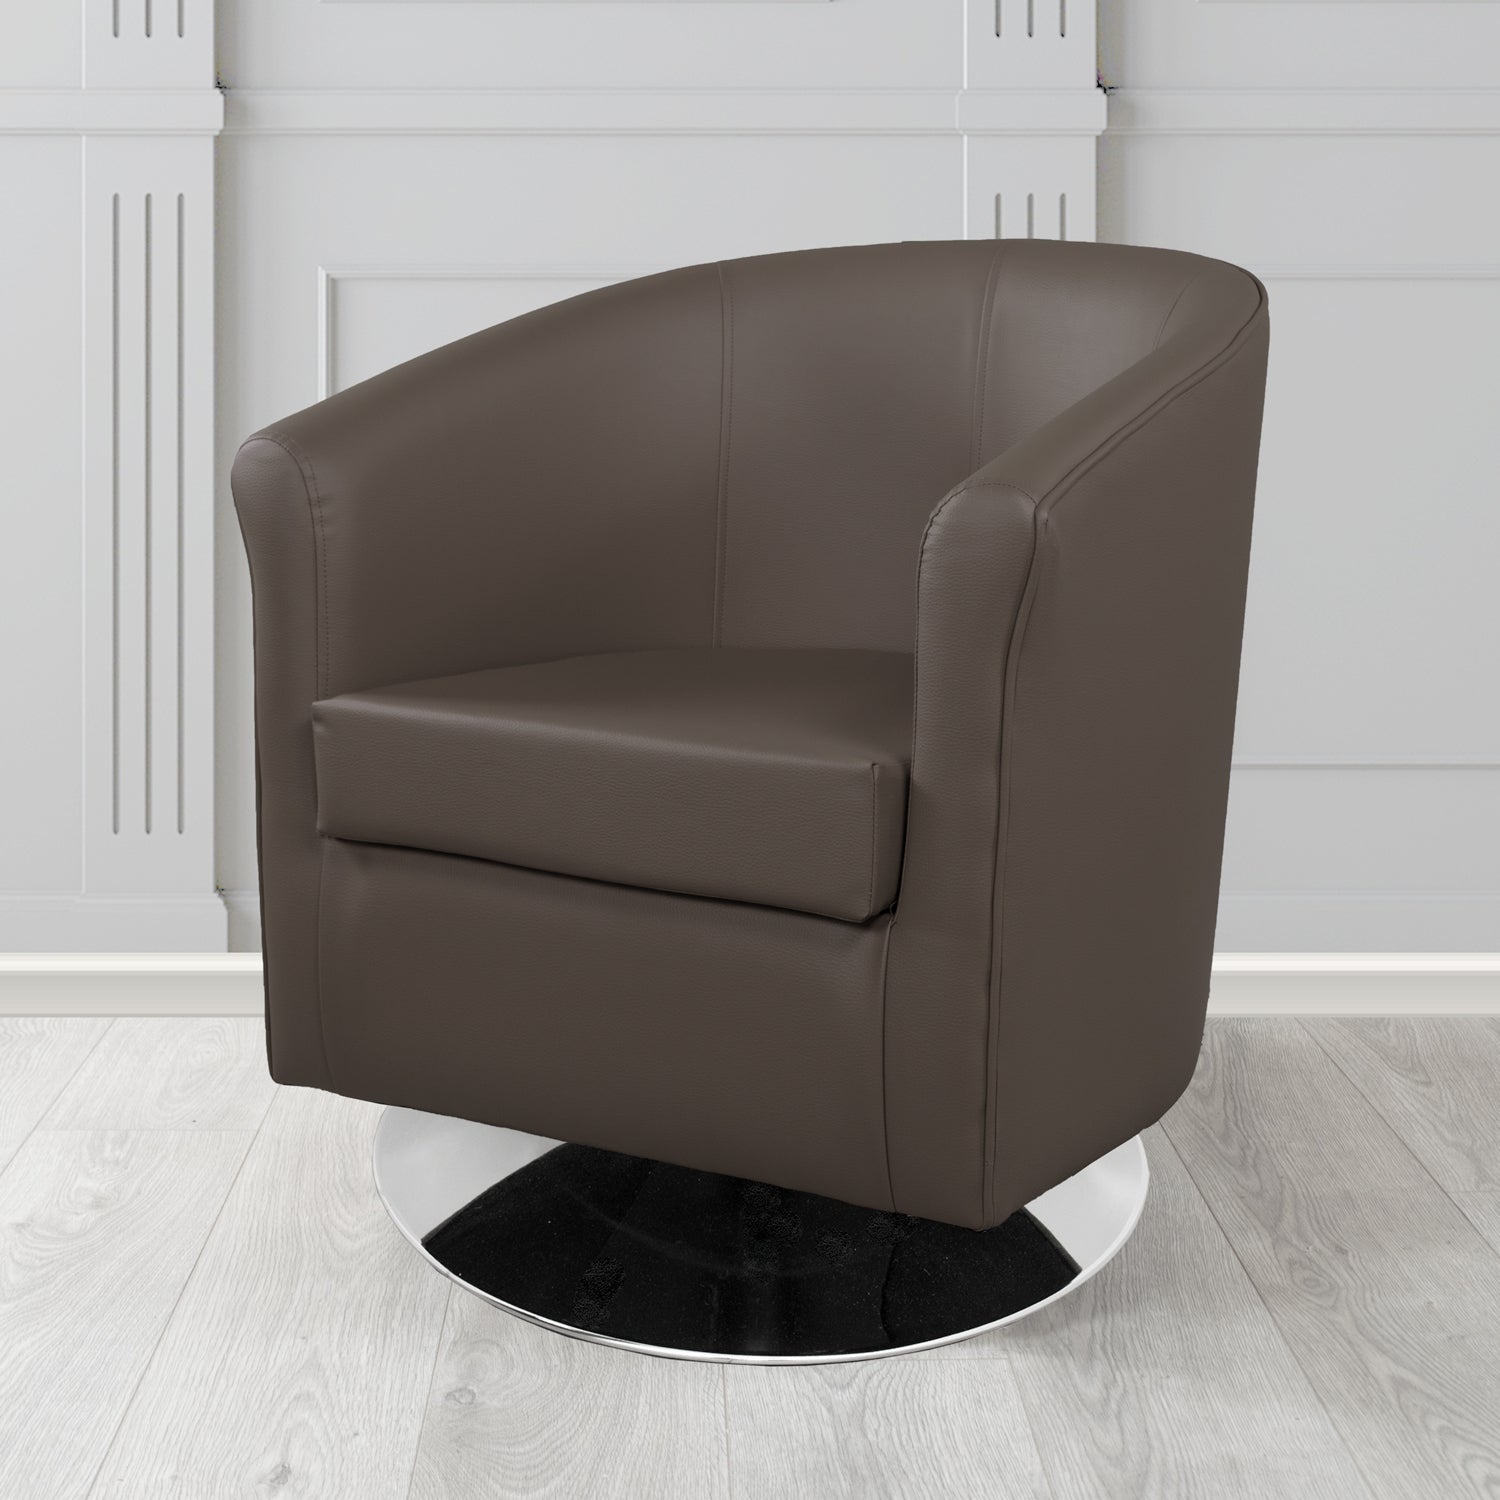 Tuscany Swivel Tub Chair in Madrid Chocolate Faux Leather